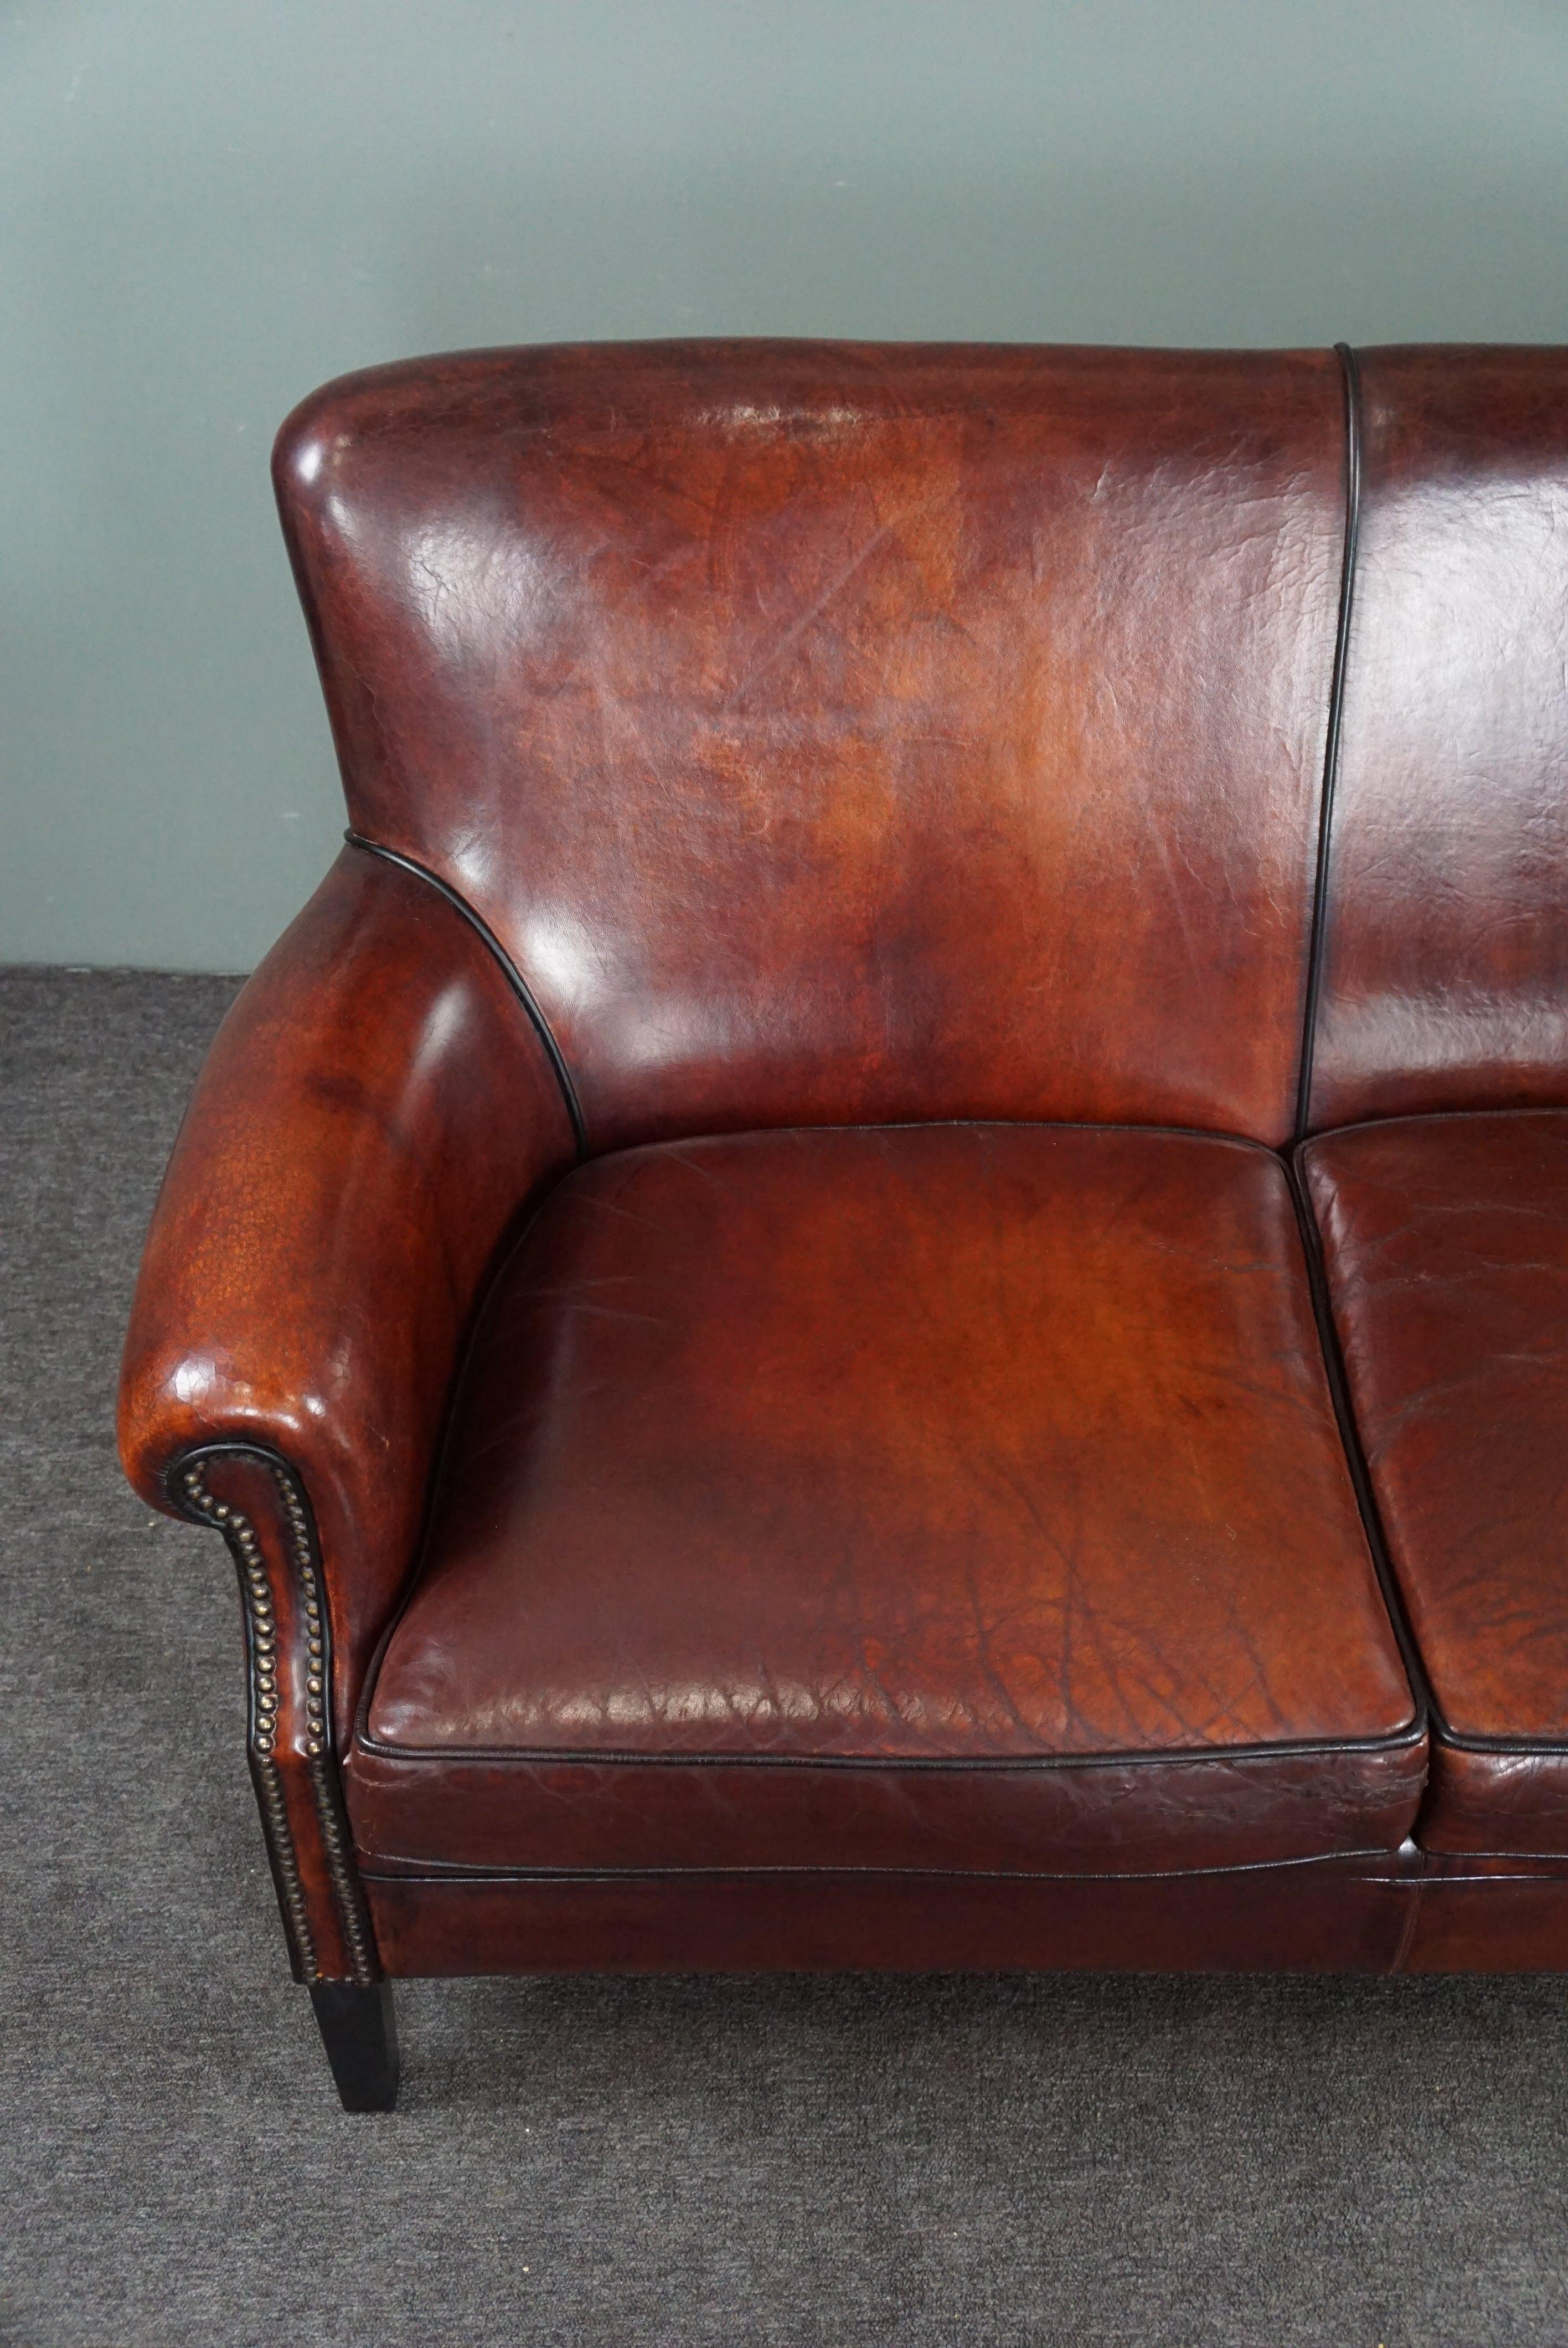 Sheep leather sofa finished with black piping, 3 seater In Good Condition For Sale In Harderwijk, NL